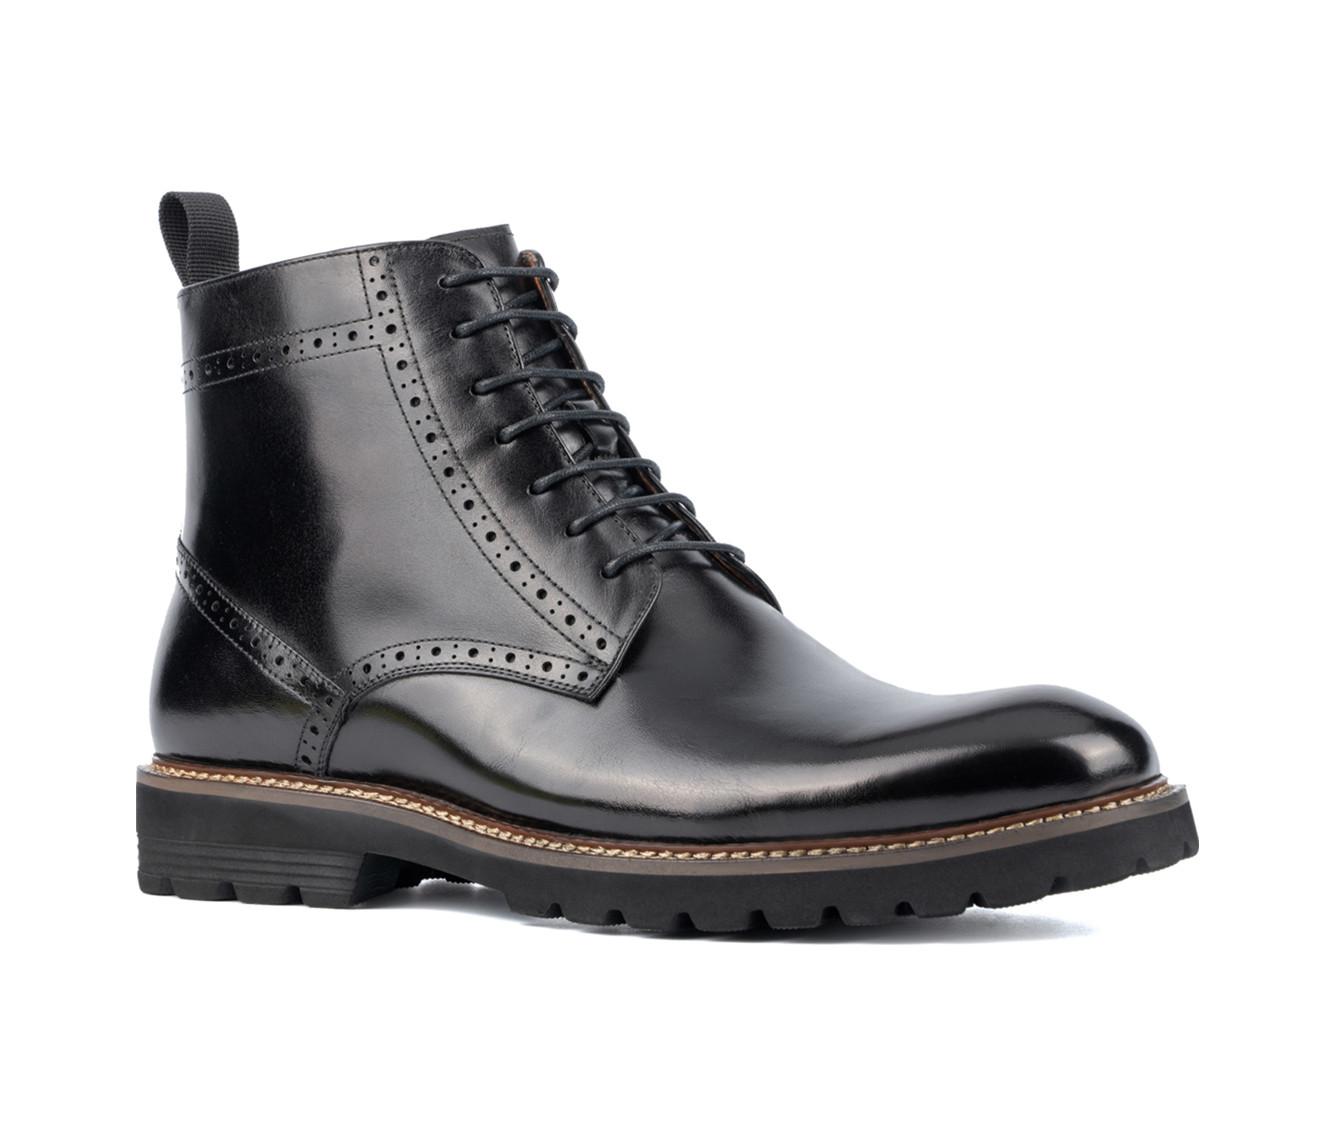 Men's Vintage Foundry Co Blade Lace Up Dress Boots